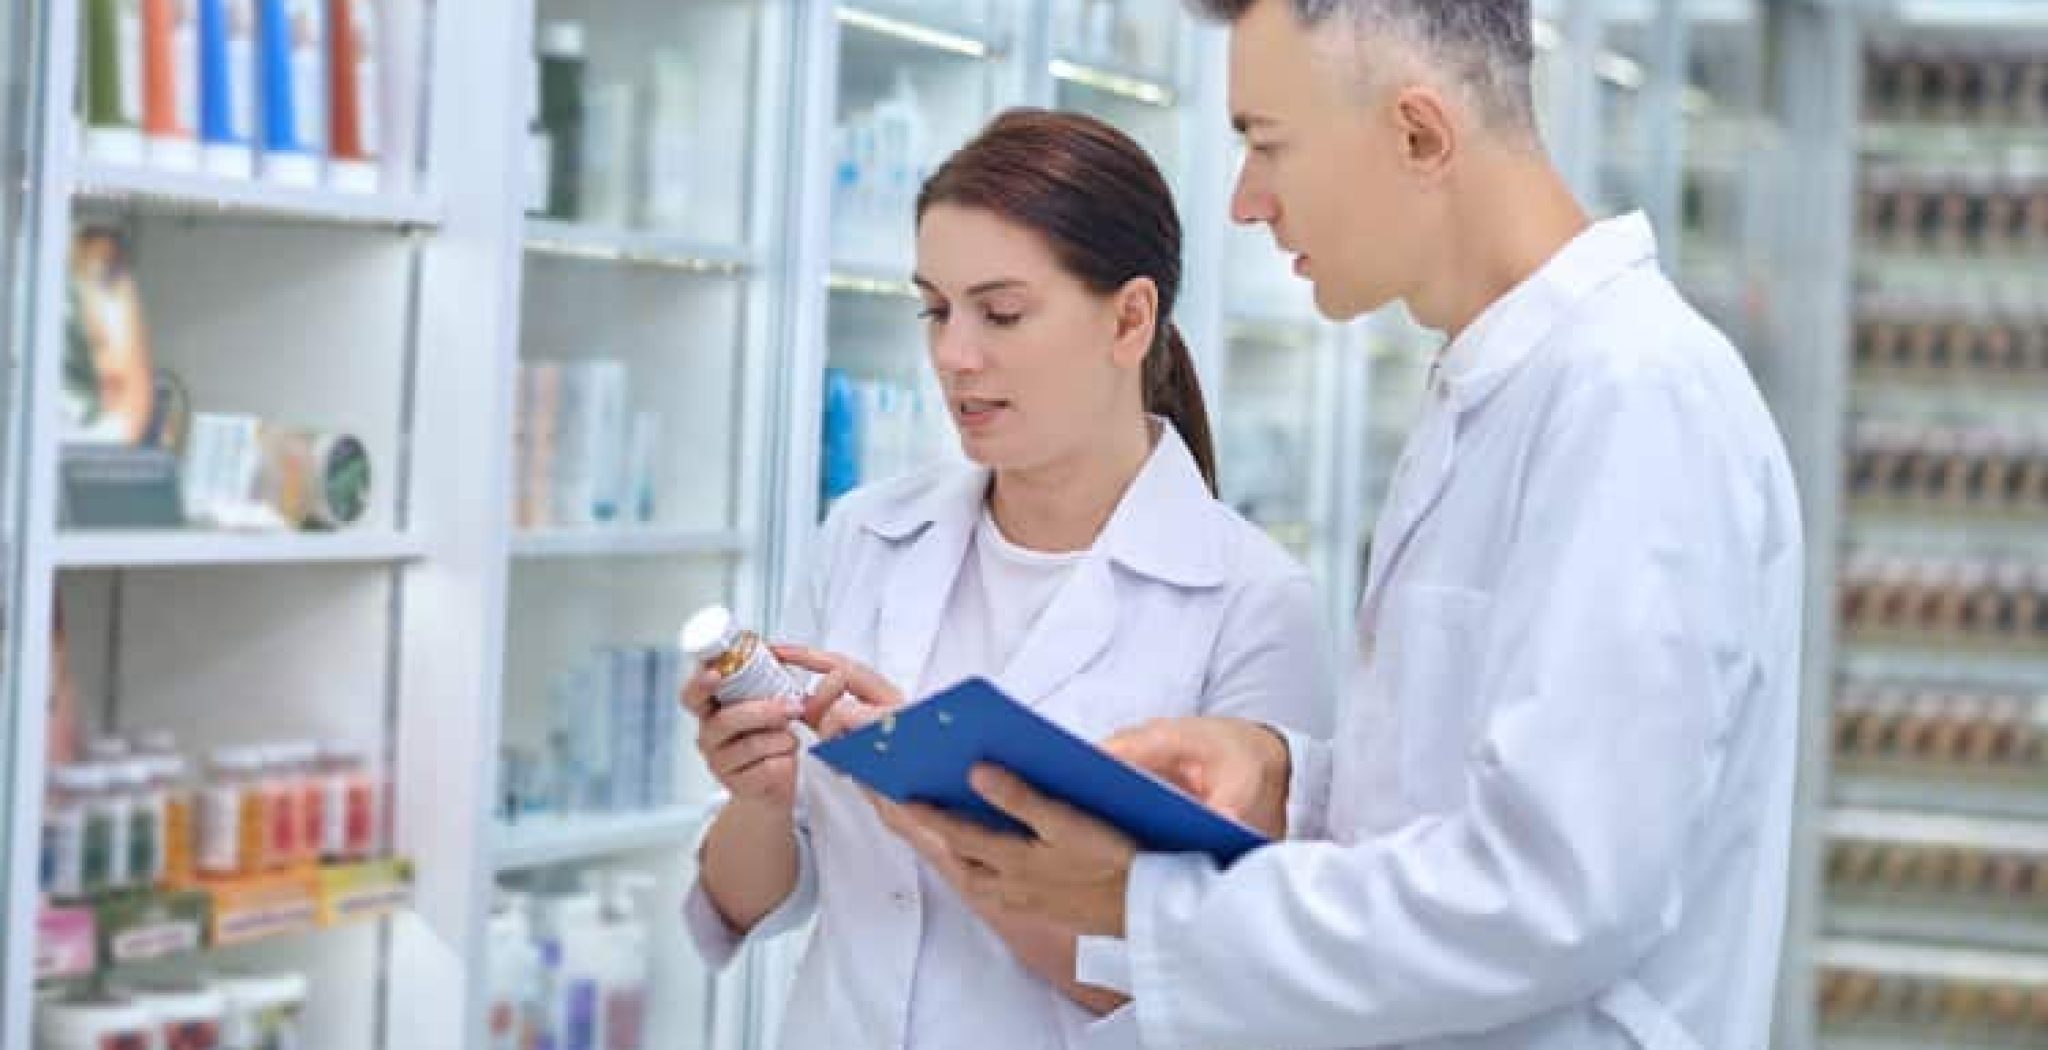 Two pharmacists discussing medications in a pharmacy